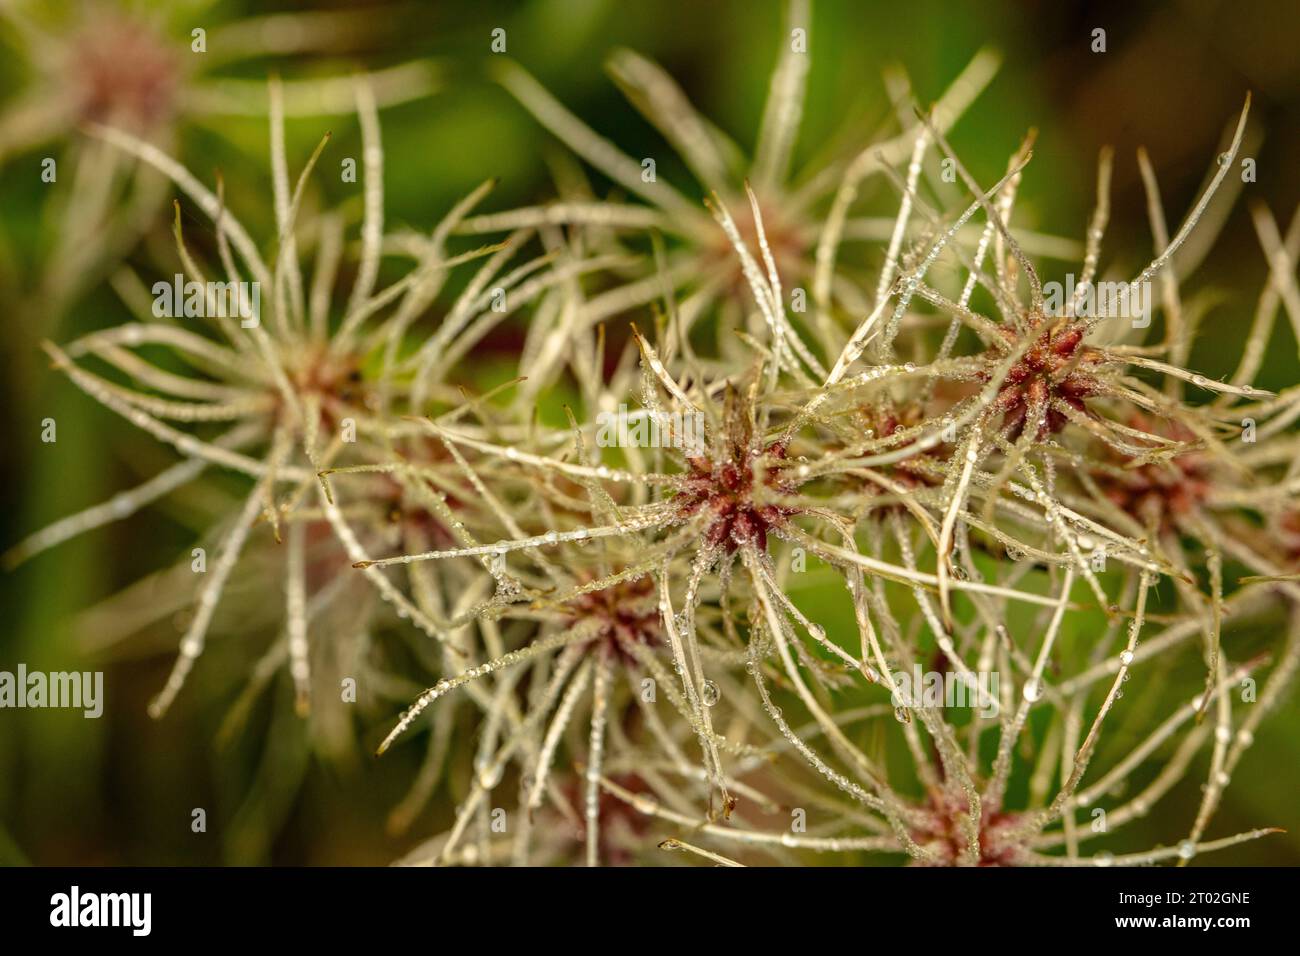 Natural close up plant portrait of Usnea Subfloridana (old man’s beard) showing natures chaos in its structure Stock Photo